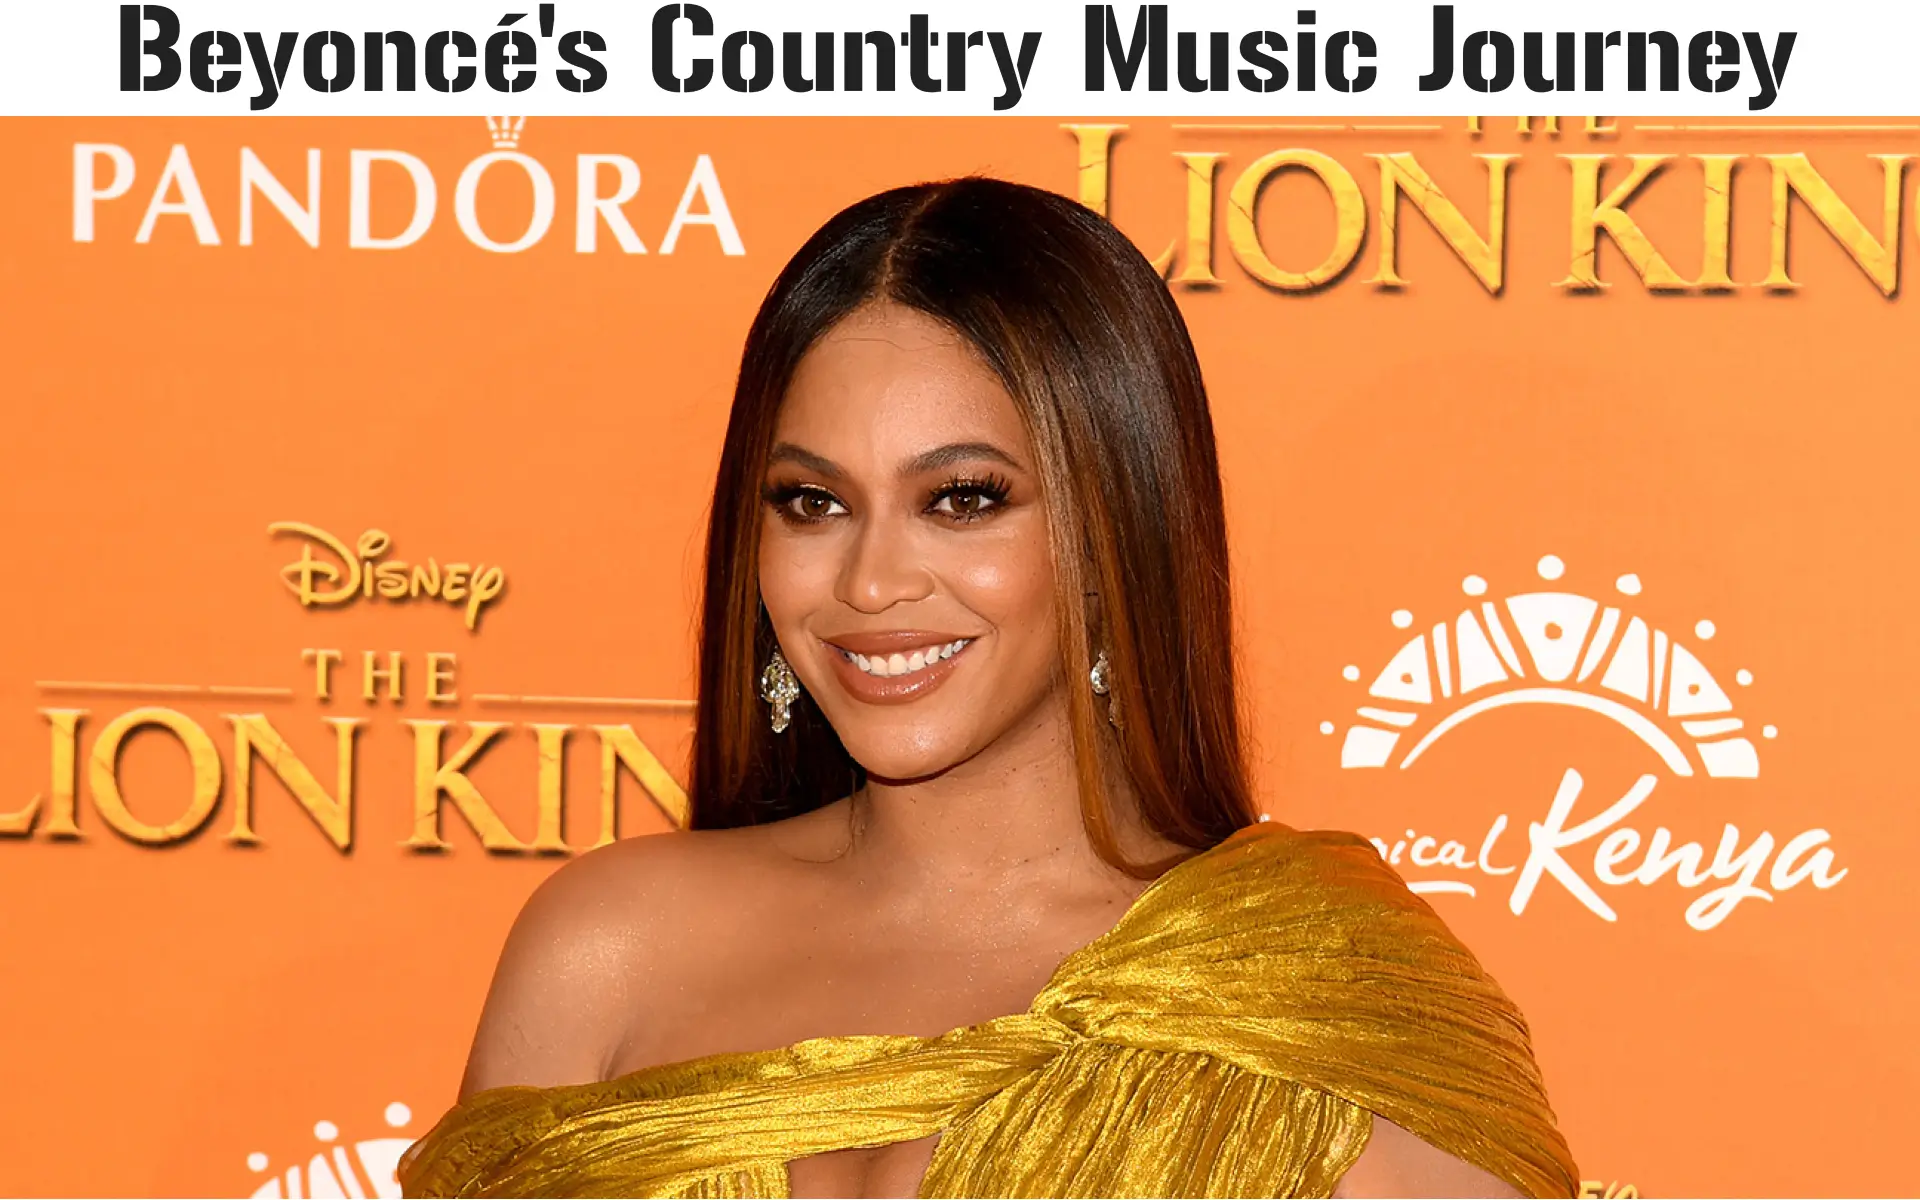 Beyoncé's Country Music Journey